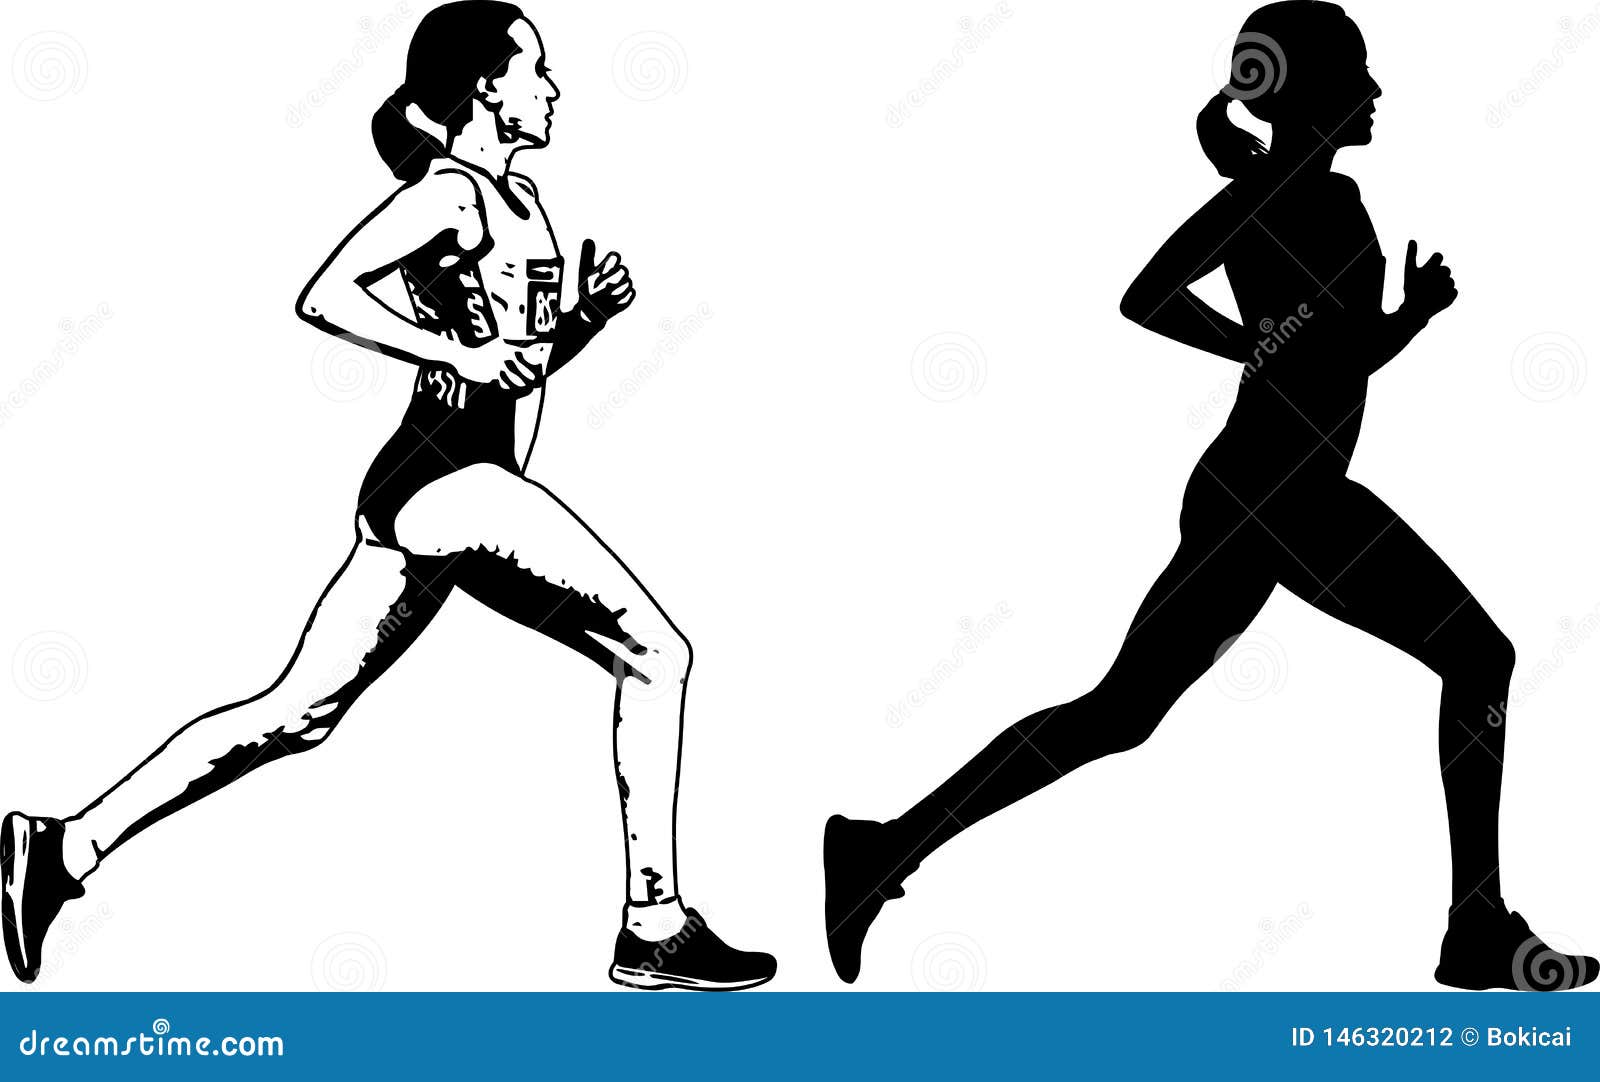 Download Female Runner Sketch And Silhouette Stock Vector - Illustration of activity, race: 146320212